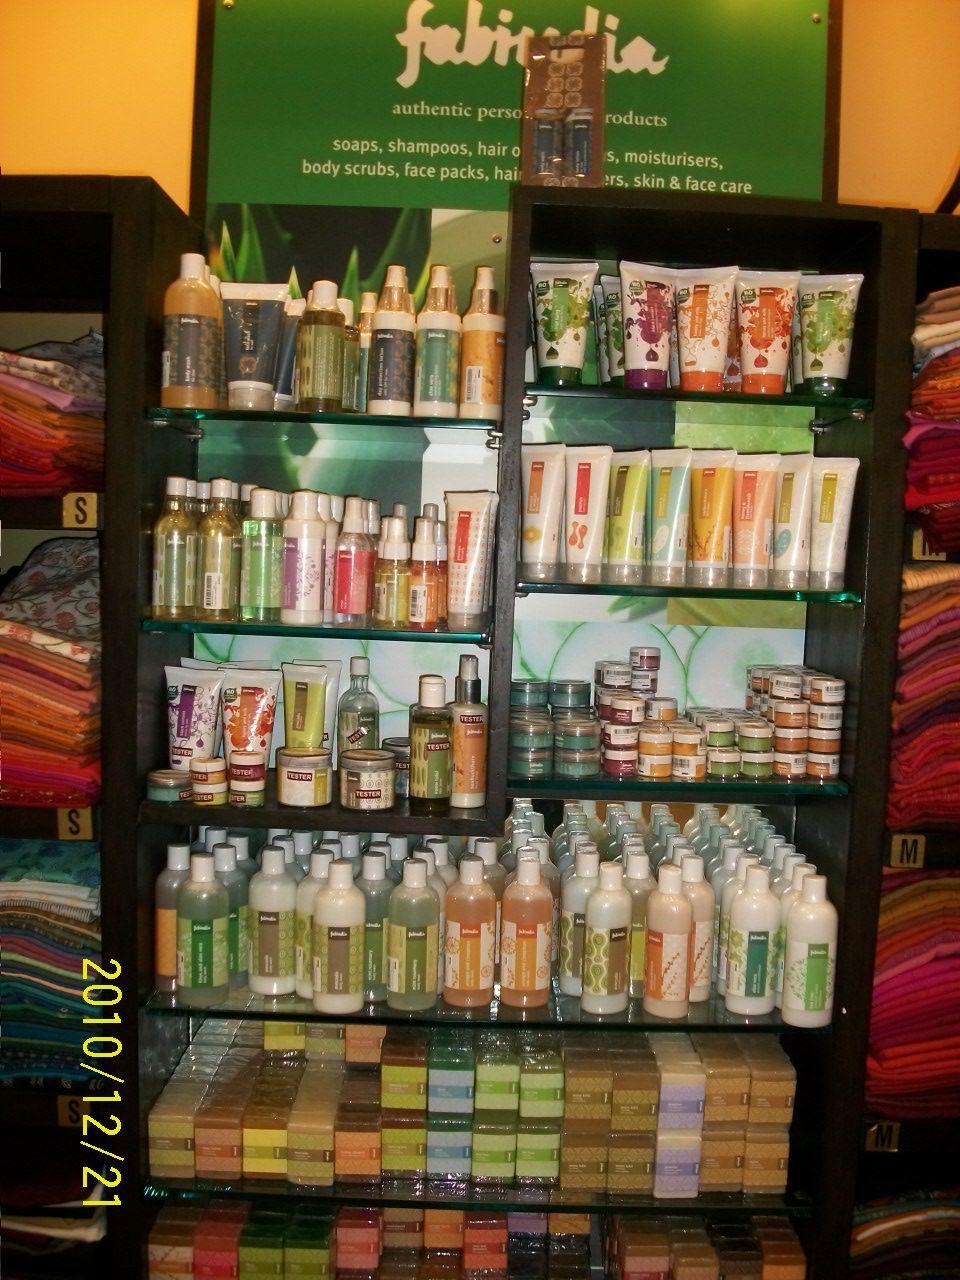 Range: Skin Care: Face Wash, Soap, Body Washes, Creams, Lotions, Facial Sprays,